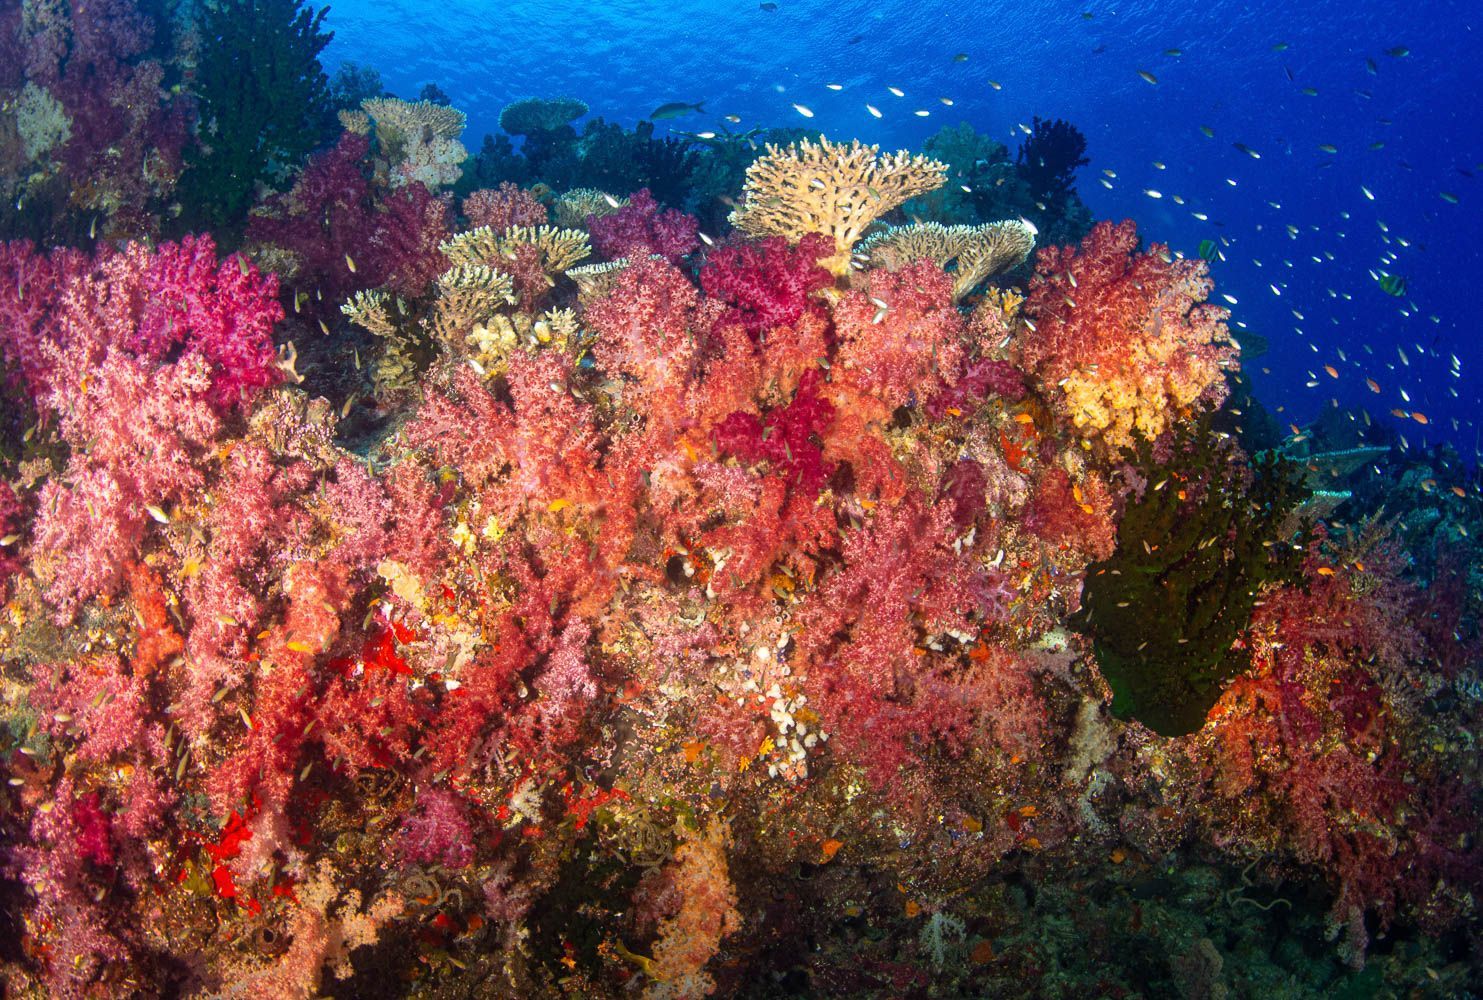 Soft corals in pinks, reds and yellows on Fiji's coral reef. Taken at Rainbow Reef